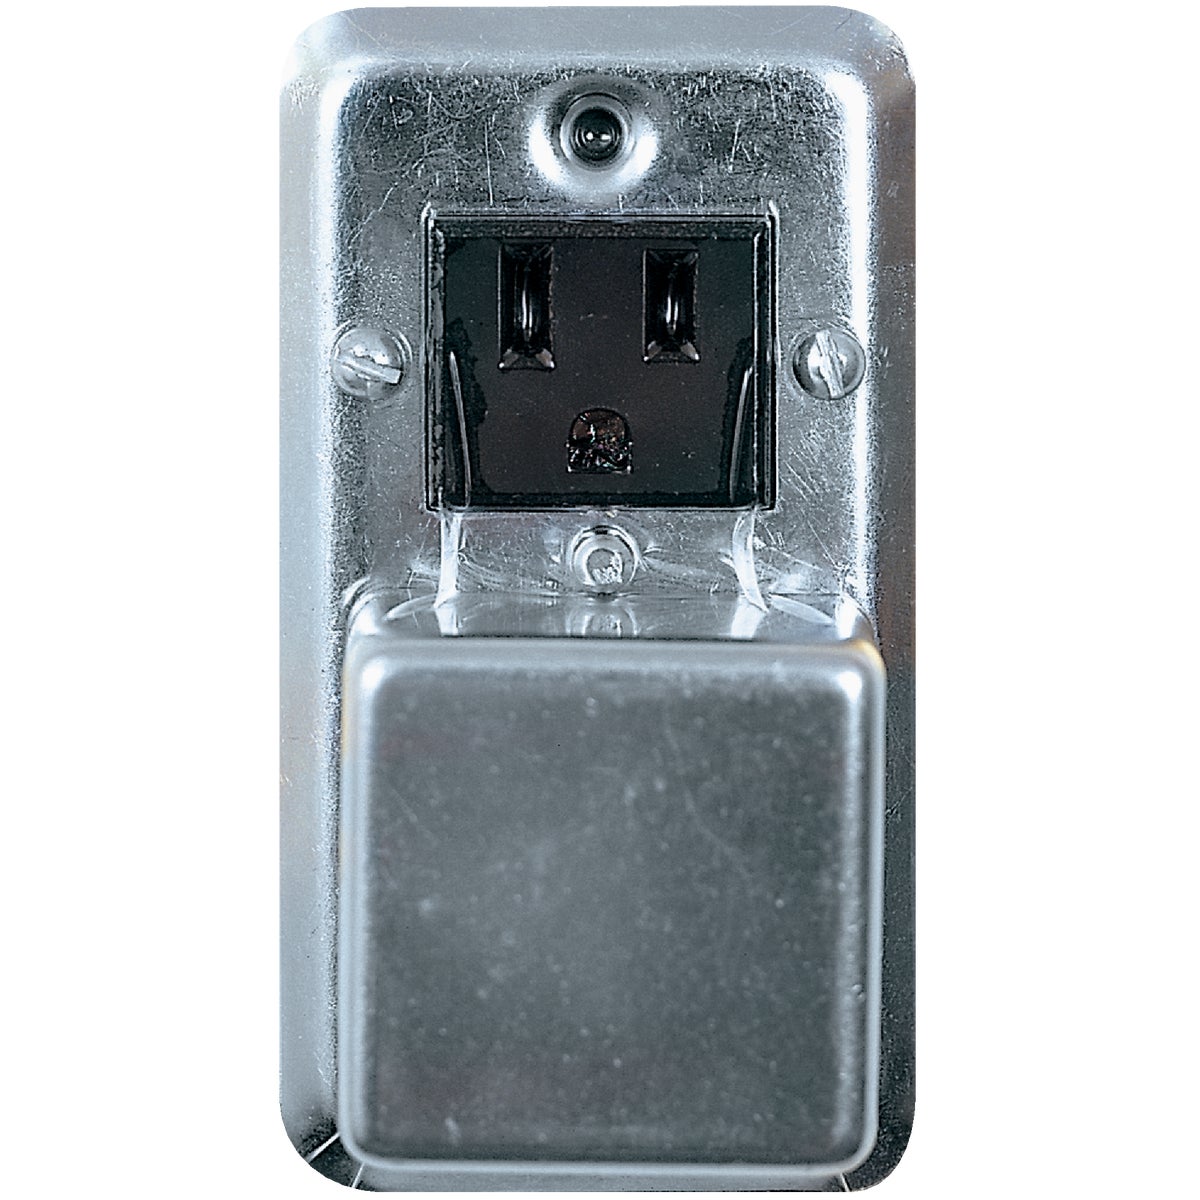 Fuse Holder Cover Plate